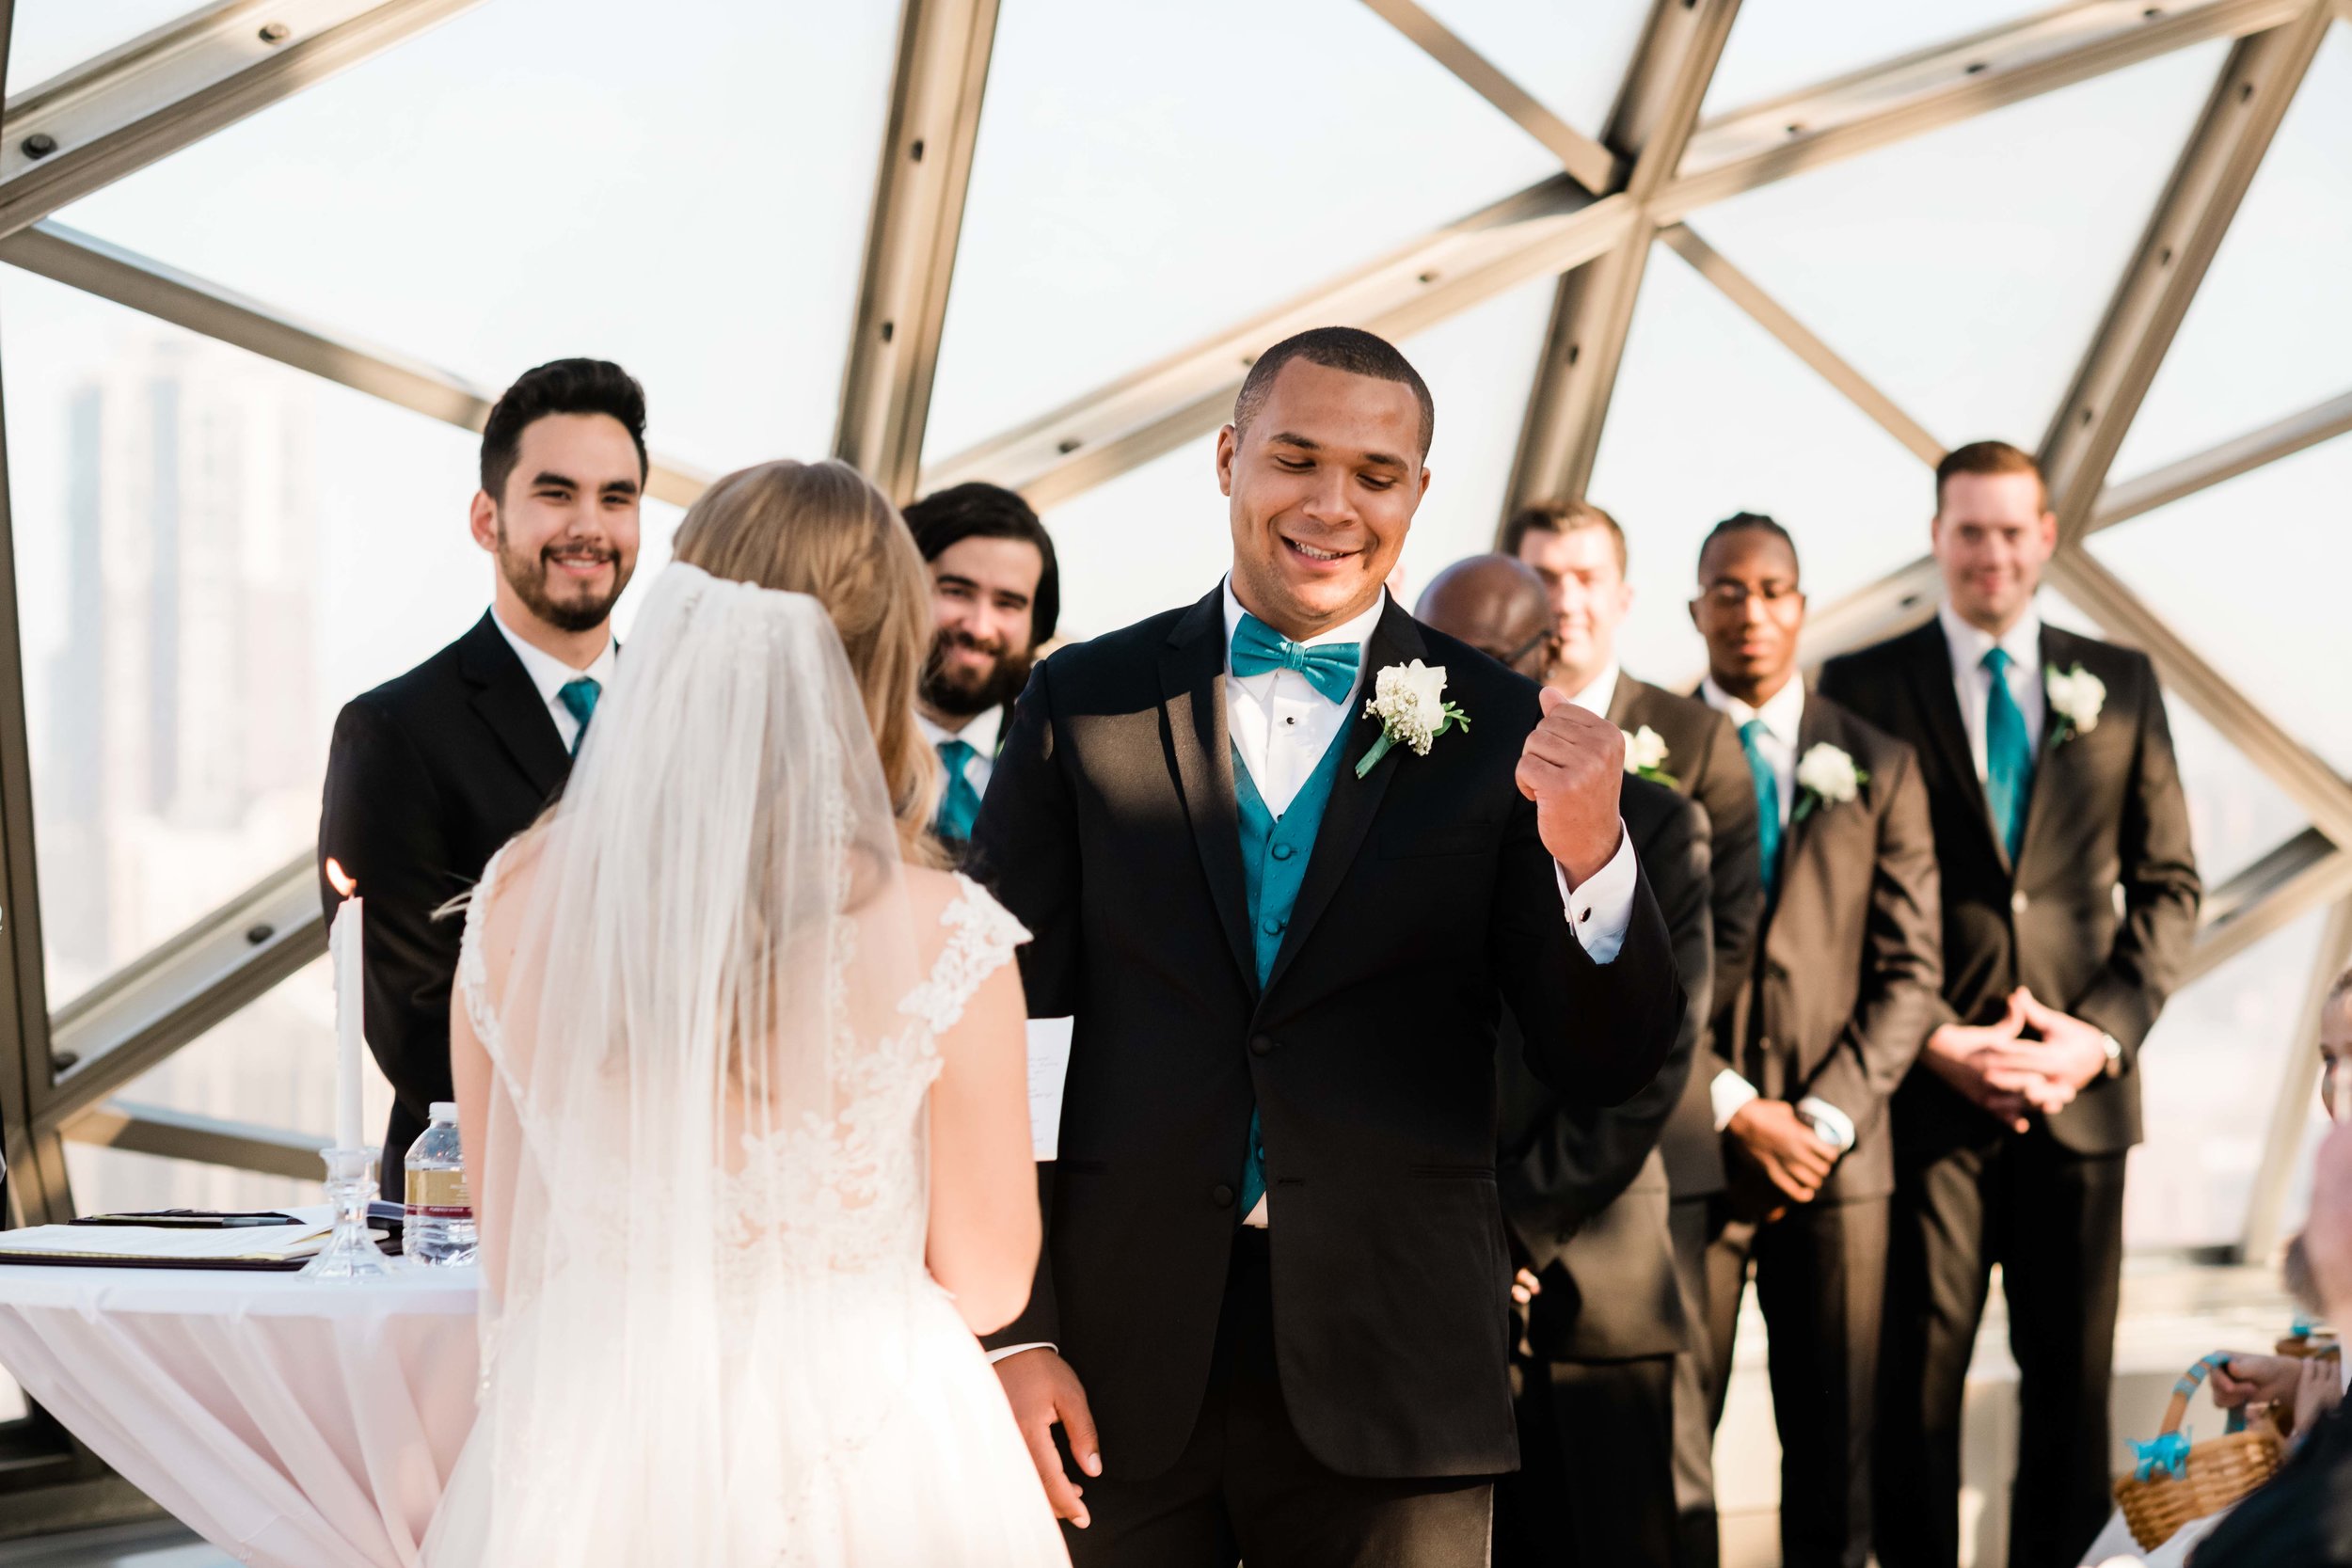 Groom does a fist pump during the ceremony